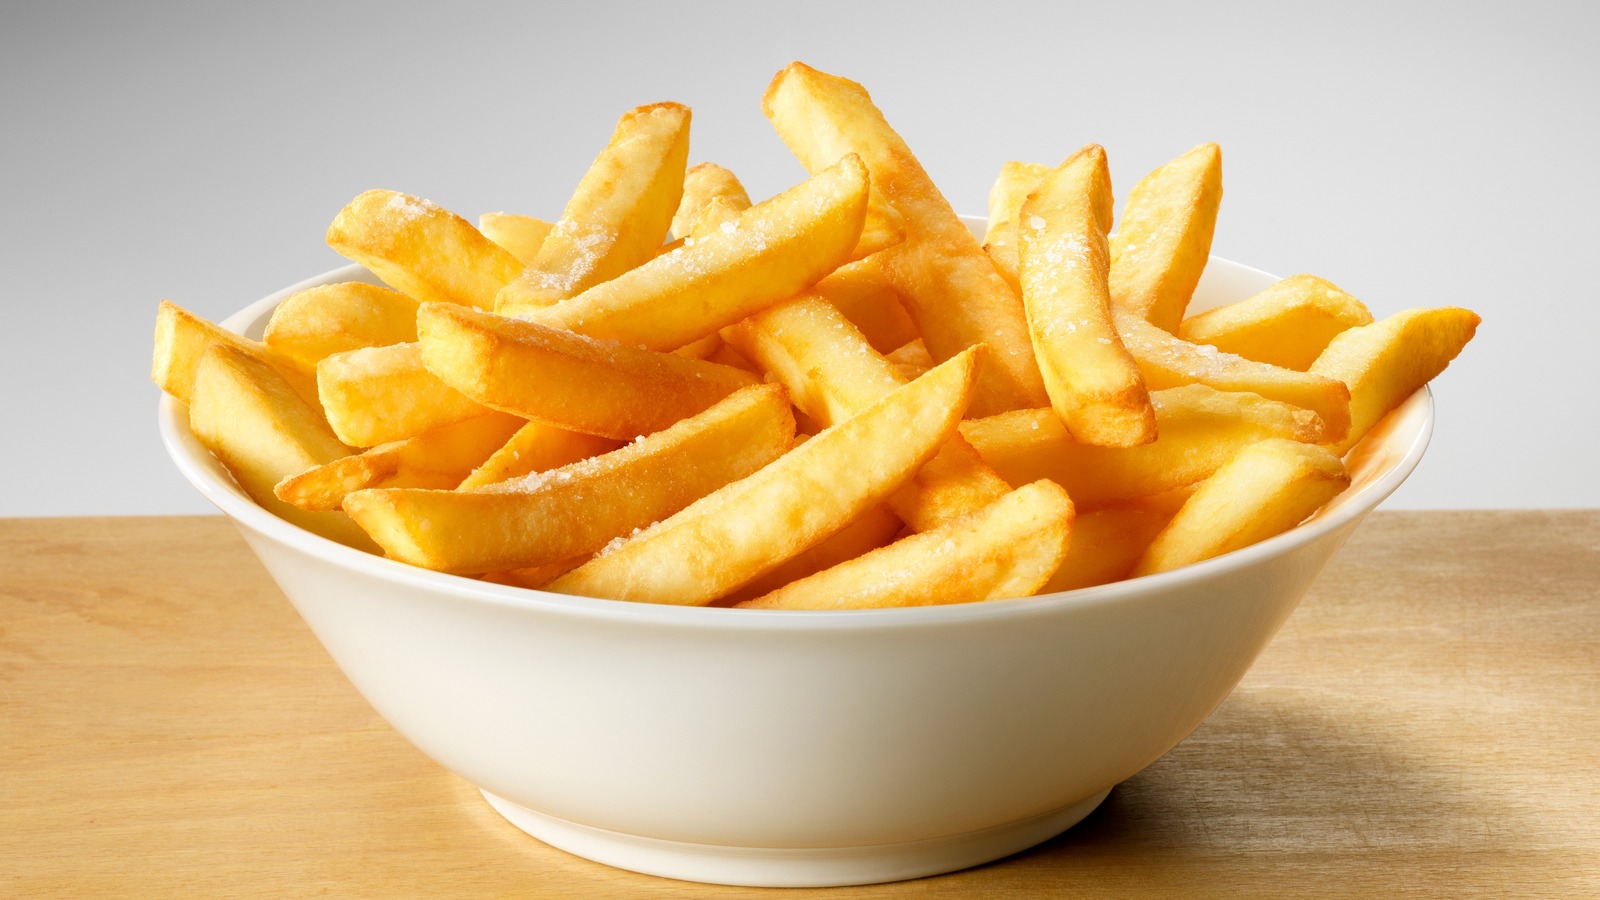 The Best & Worst Frozen French Fries, Ranked! — Eat This Not That